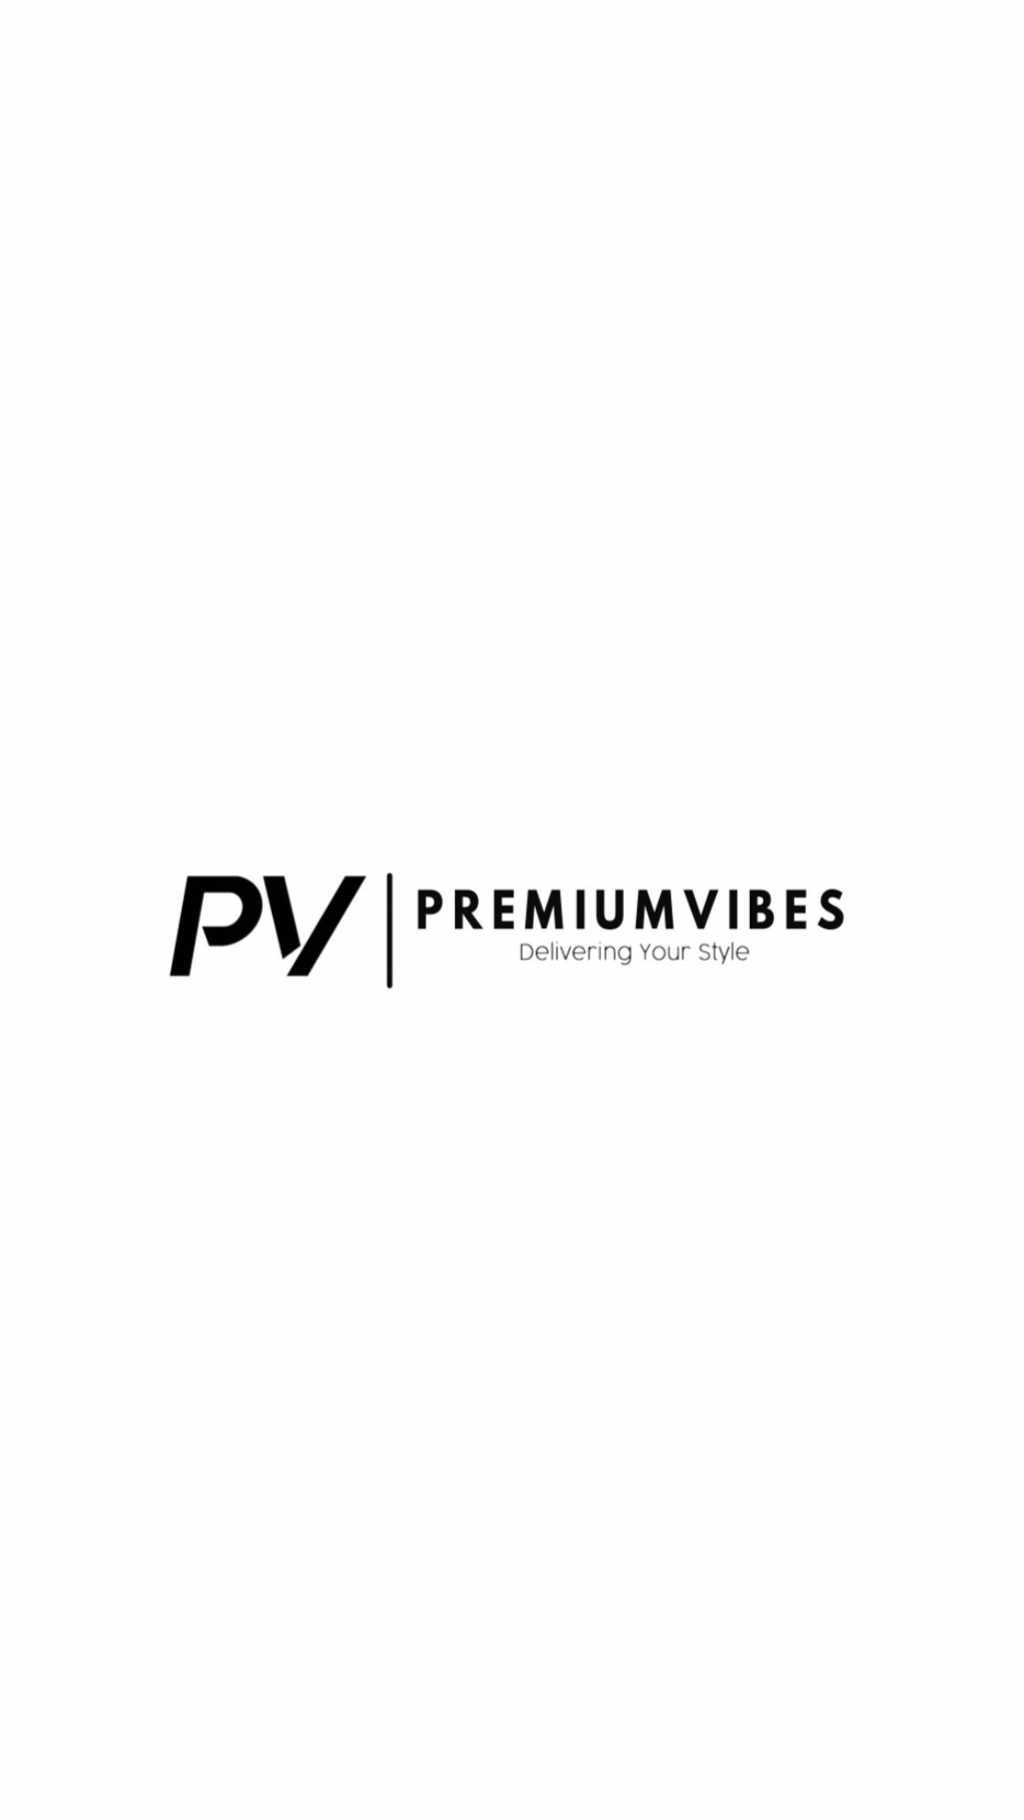 Premiumvibes is a Malaysian Online shopping website delivering original and affordable high-end designer brands such as Coach, Kate Spade, Michael Kors, Marc Jacobs, Armani Exchange and more